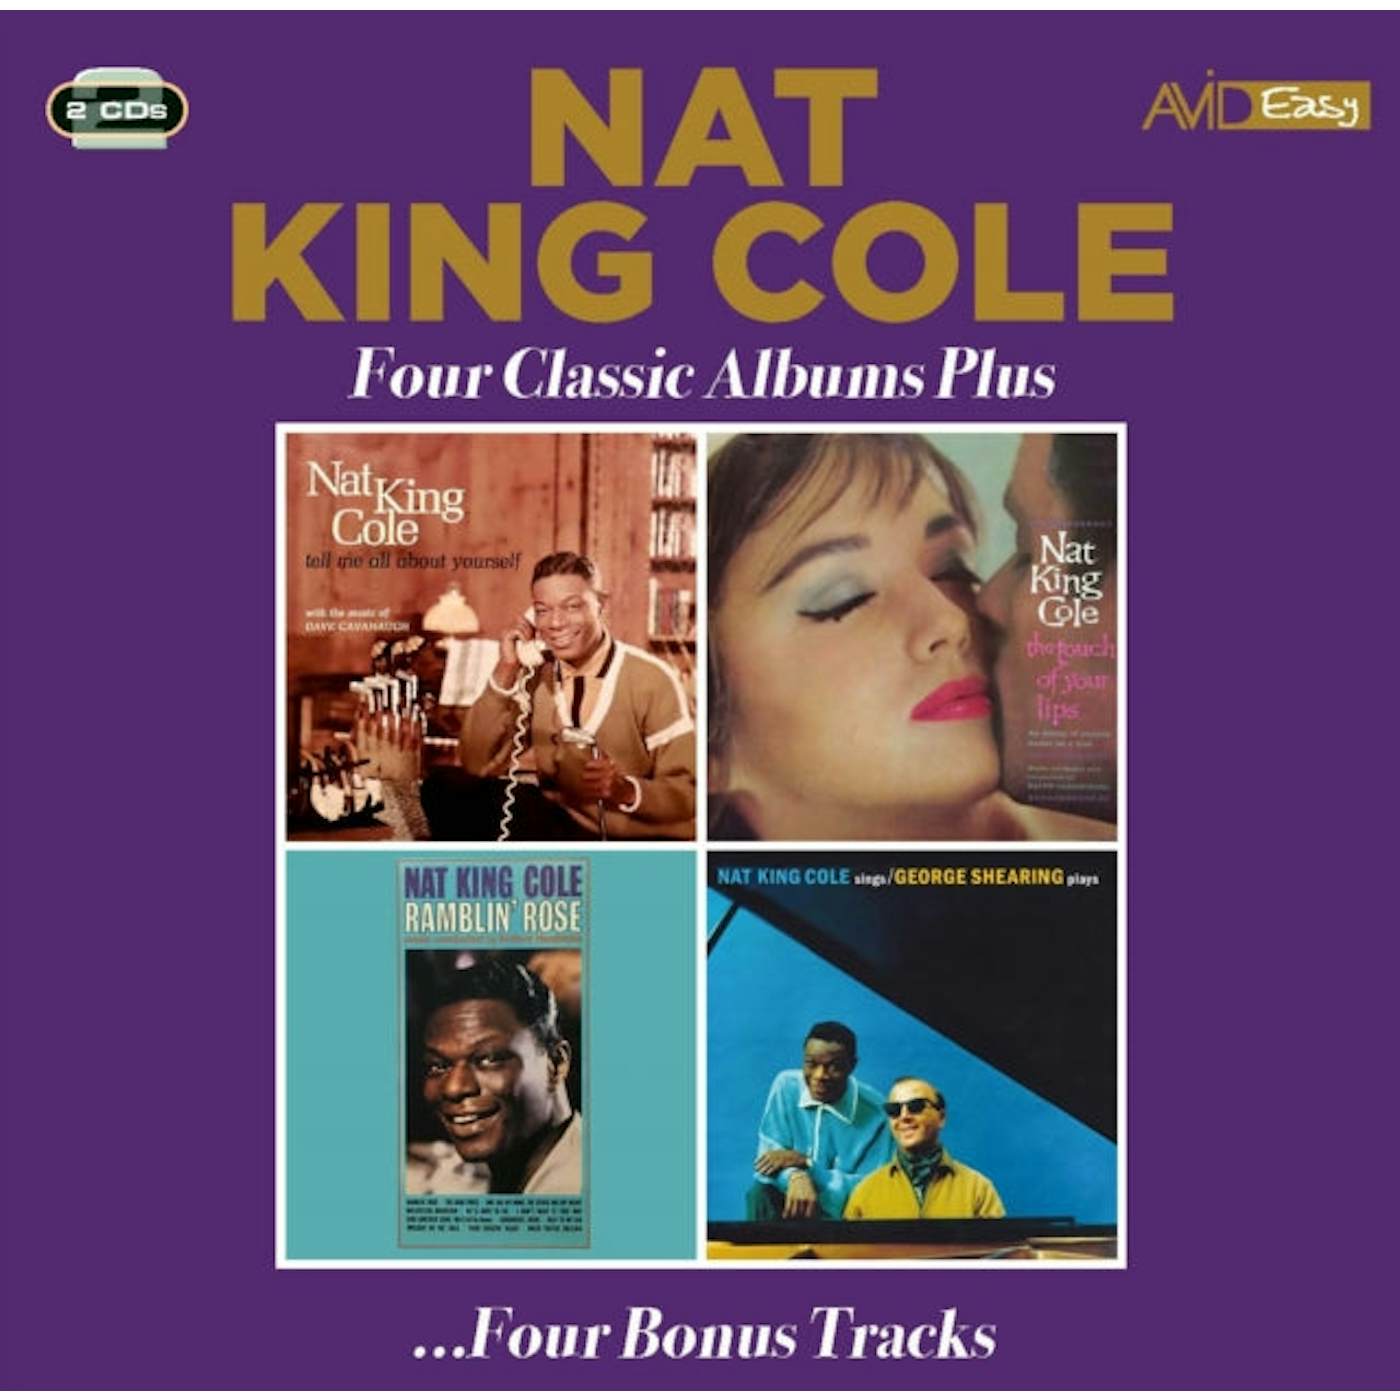 Nat King Cole CD - Four Classic Albums Plus (Tell Me All About Yourself / The Touch Of Your Lips / Ramblin' Rose / Nat King Cole Sings: George Shearing Plays)